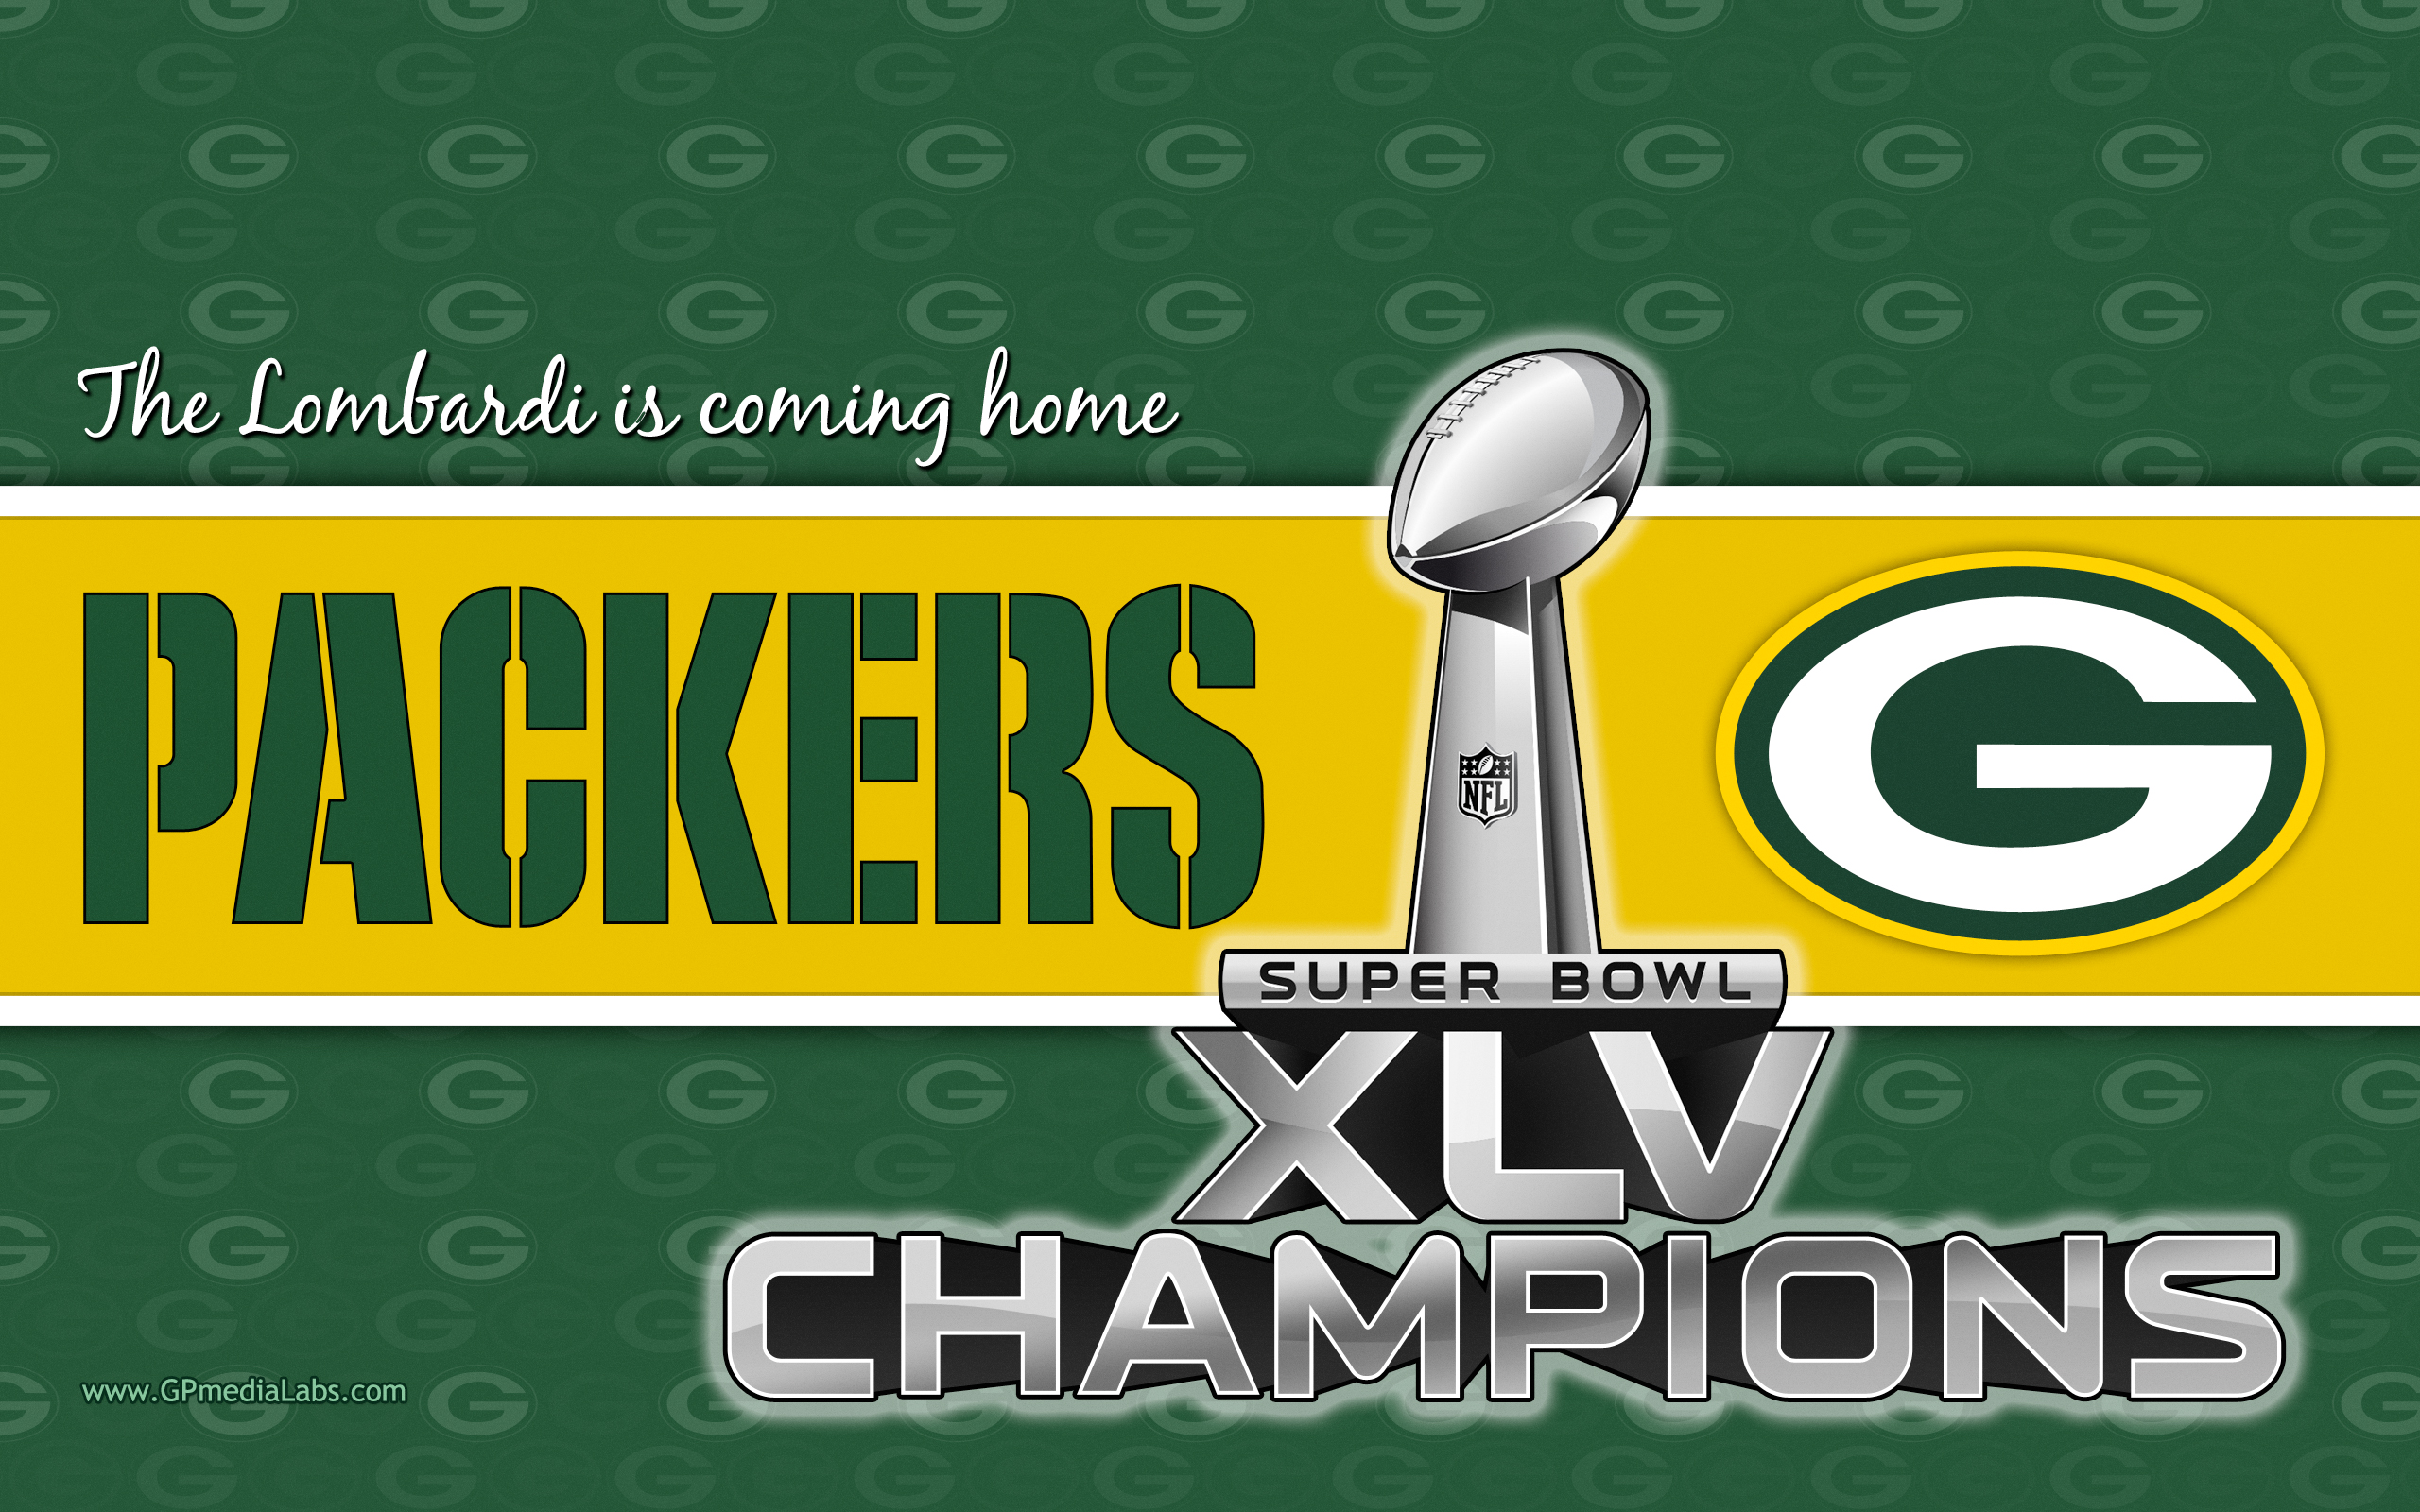 packers_wall_super_bowl_champs_by_gp_media_labs-d38zv1p.jpg